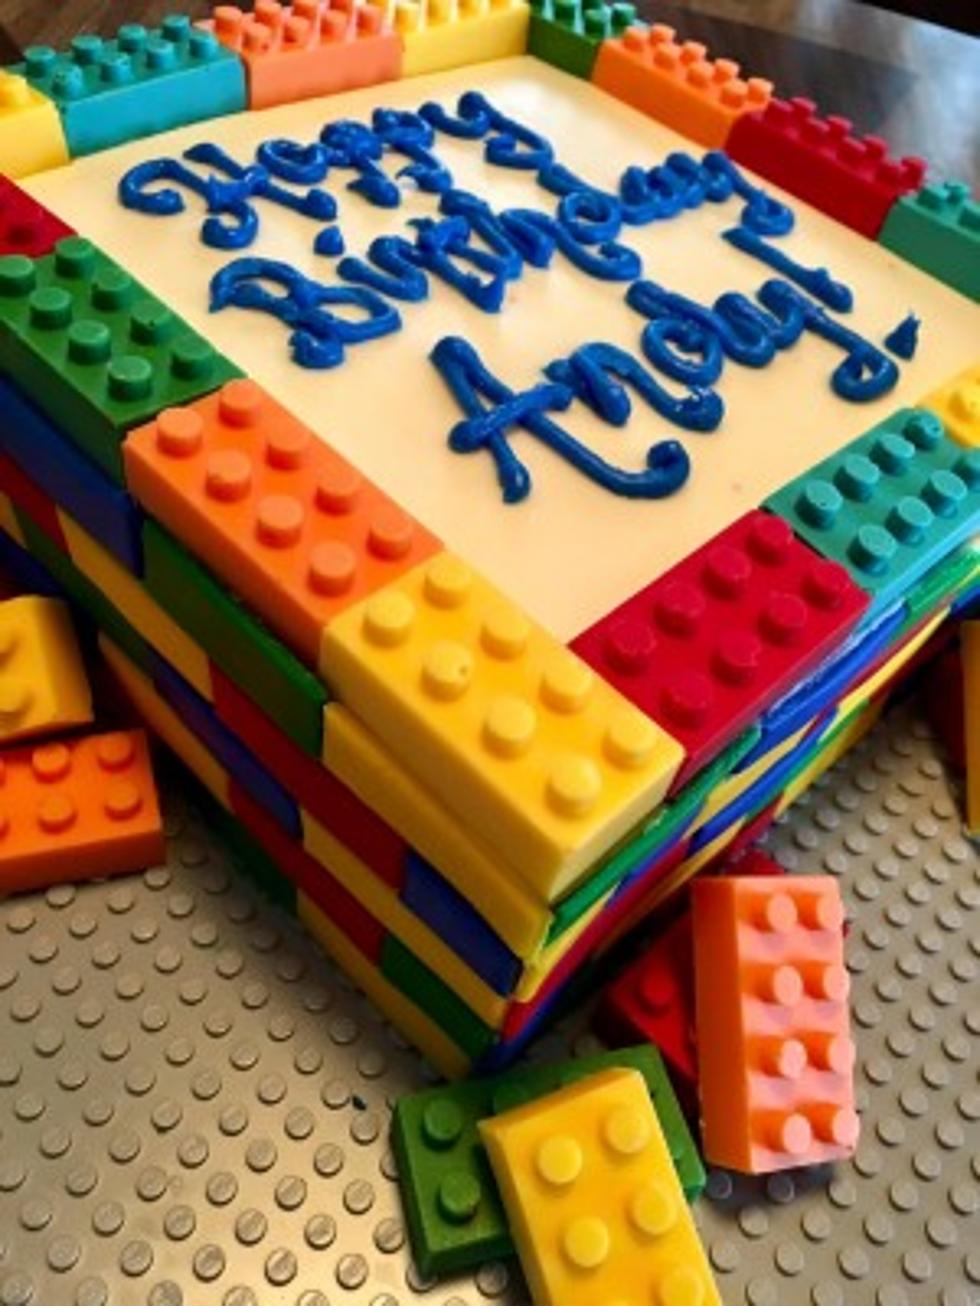 How-To Make Val's Lego Cake